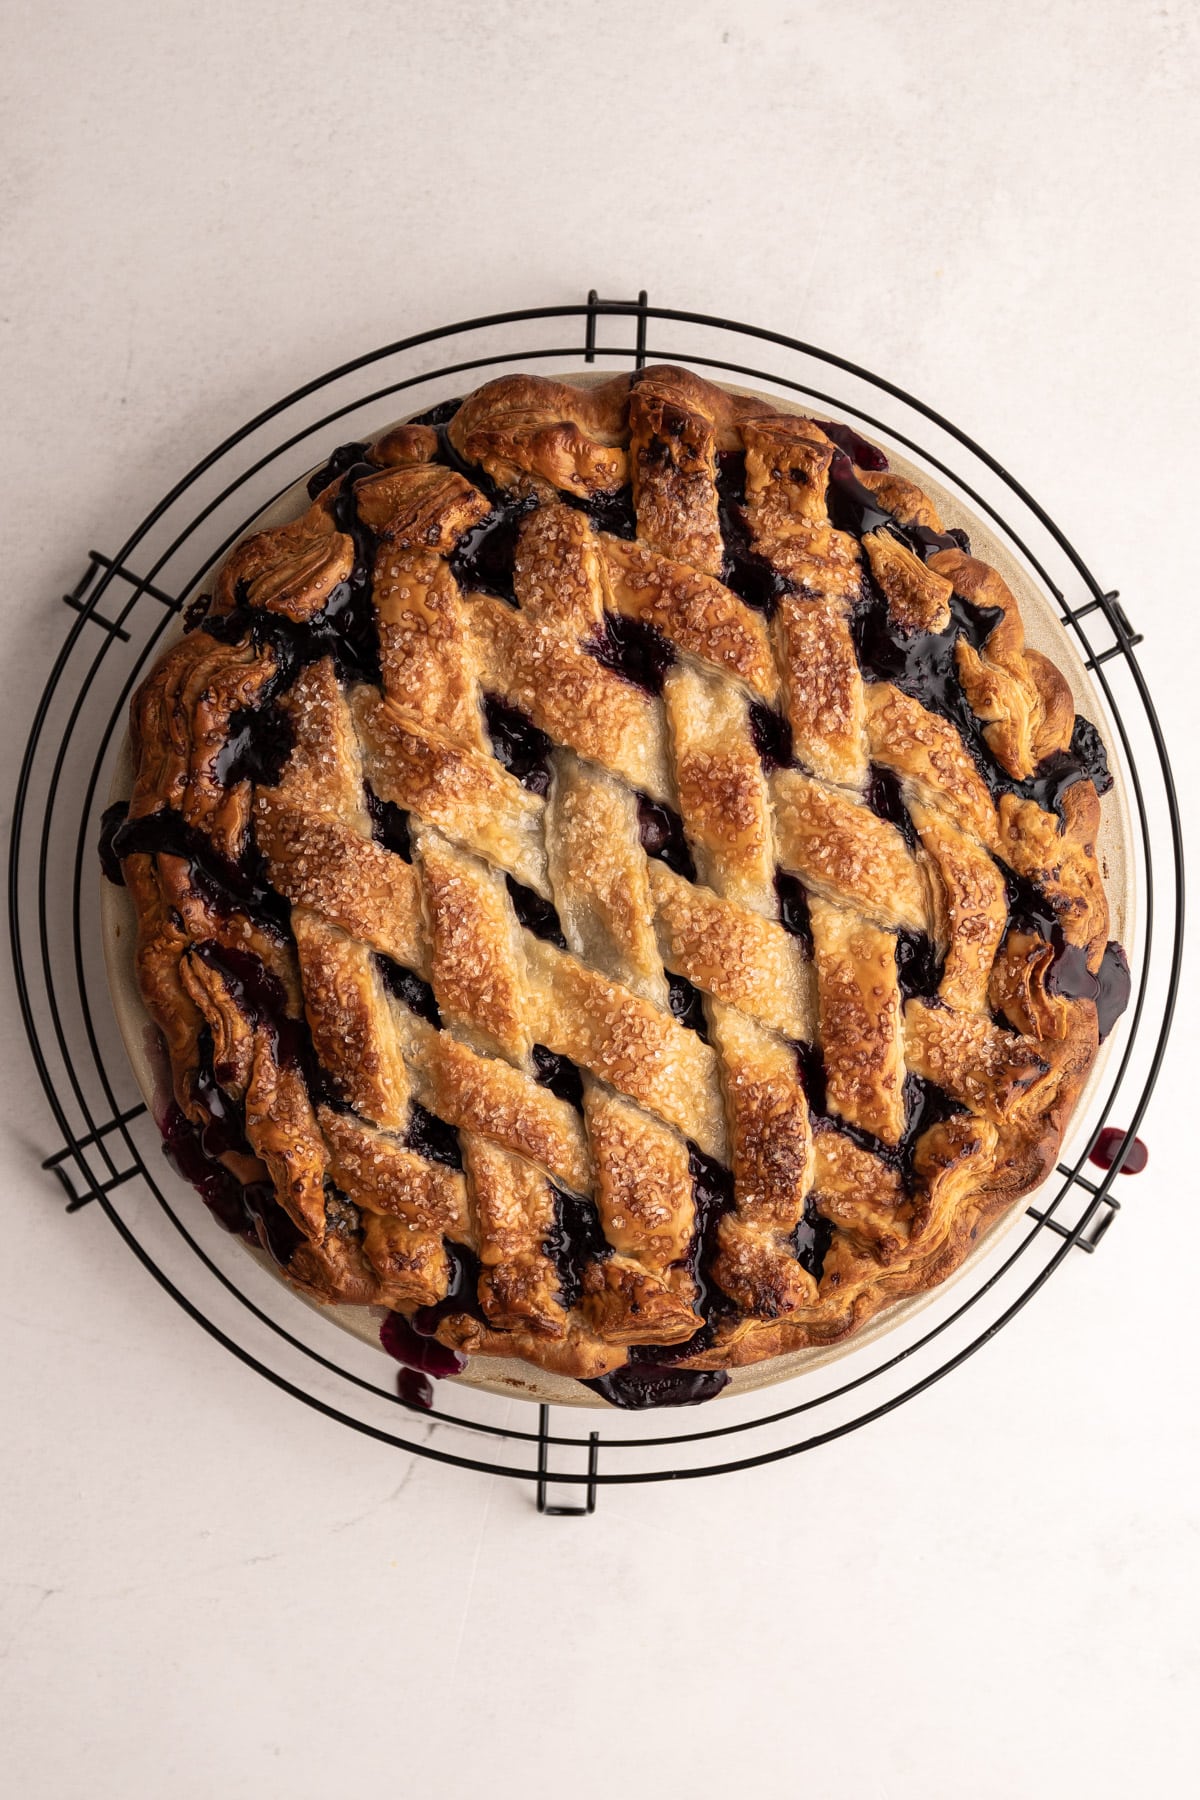 A fully baked blueberry pie made with a butter pie crust.